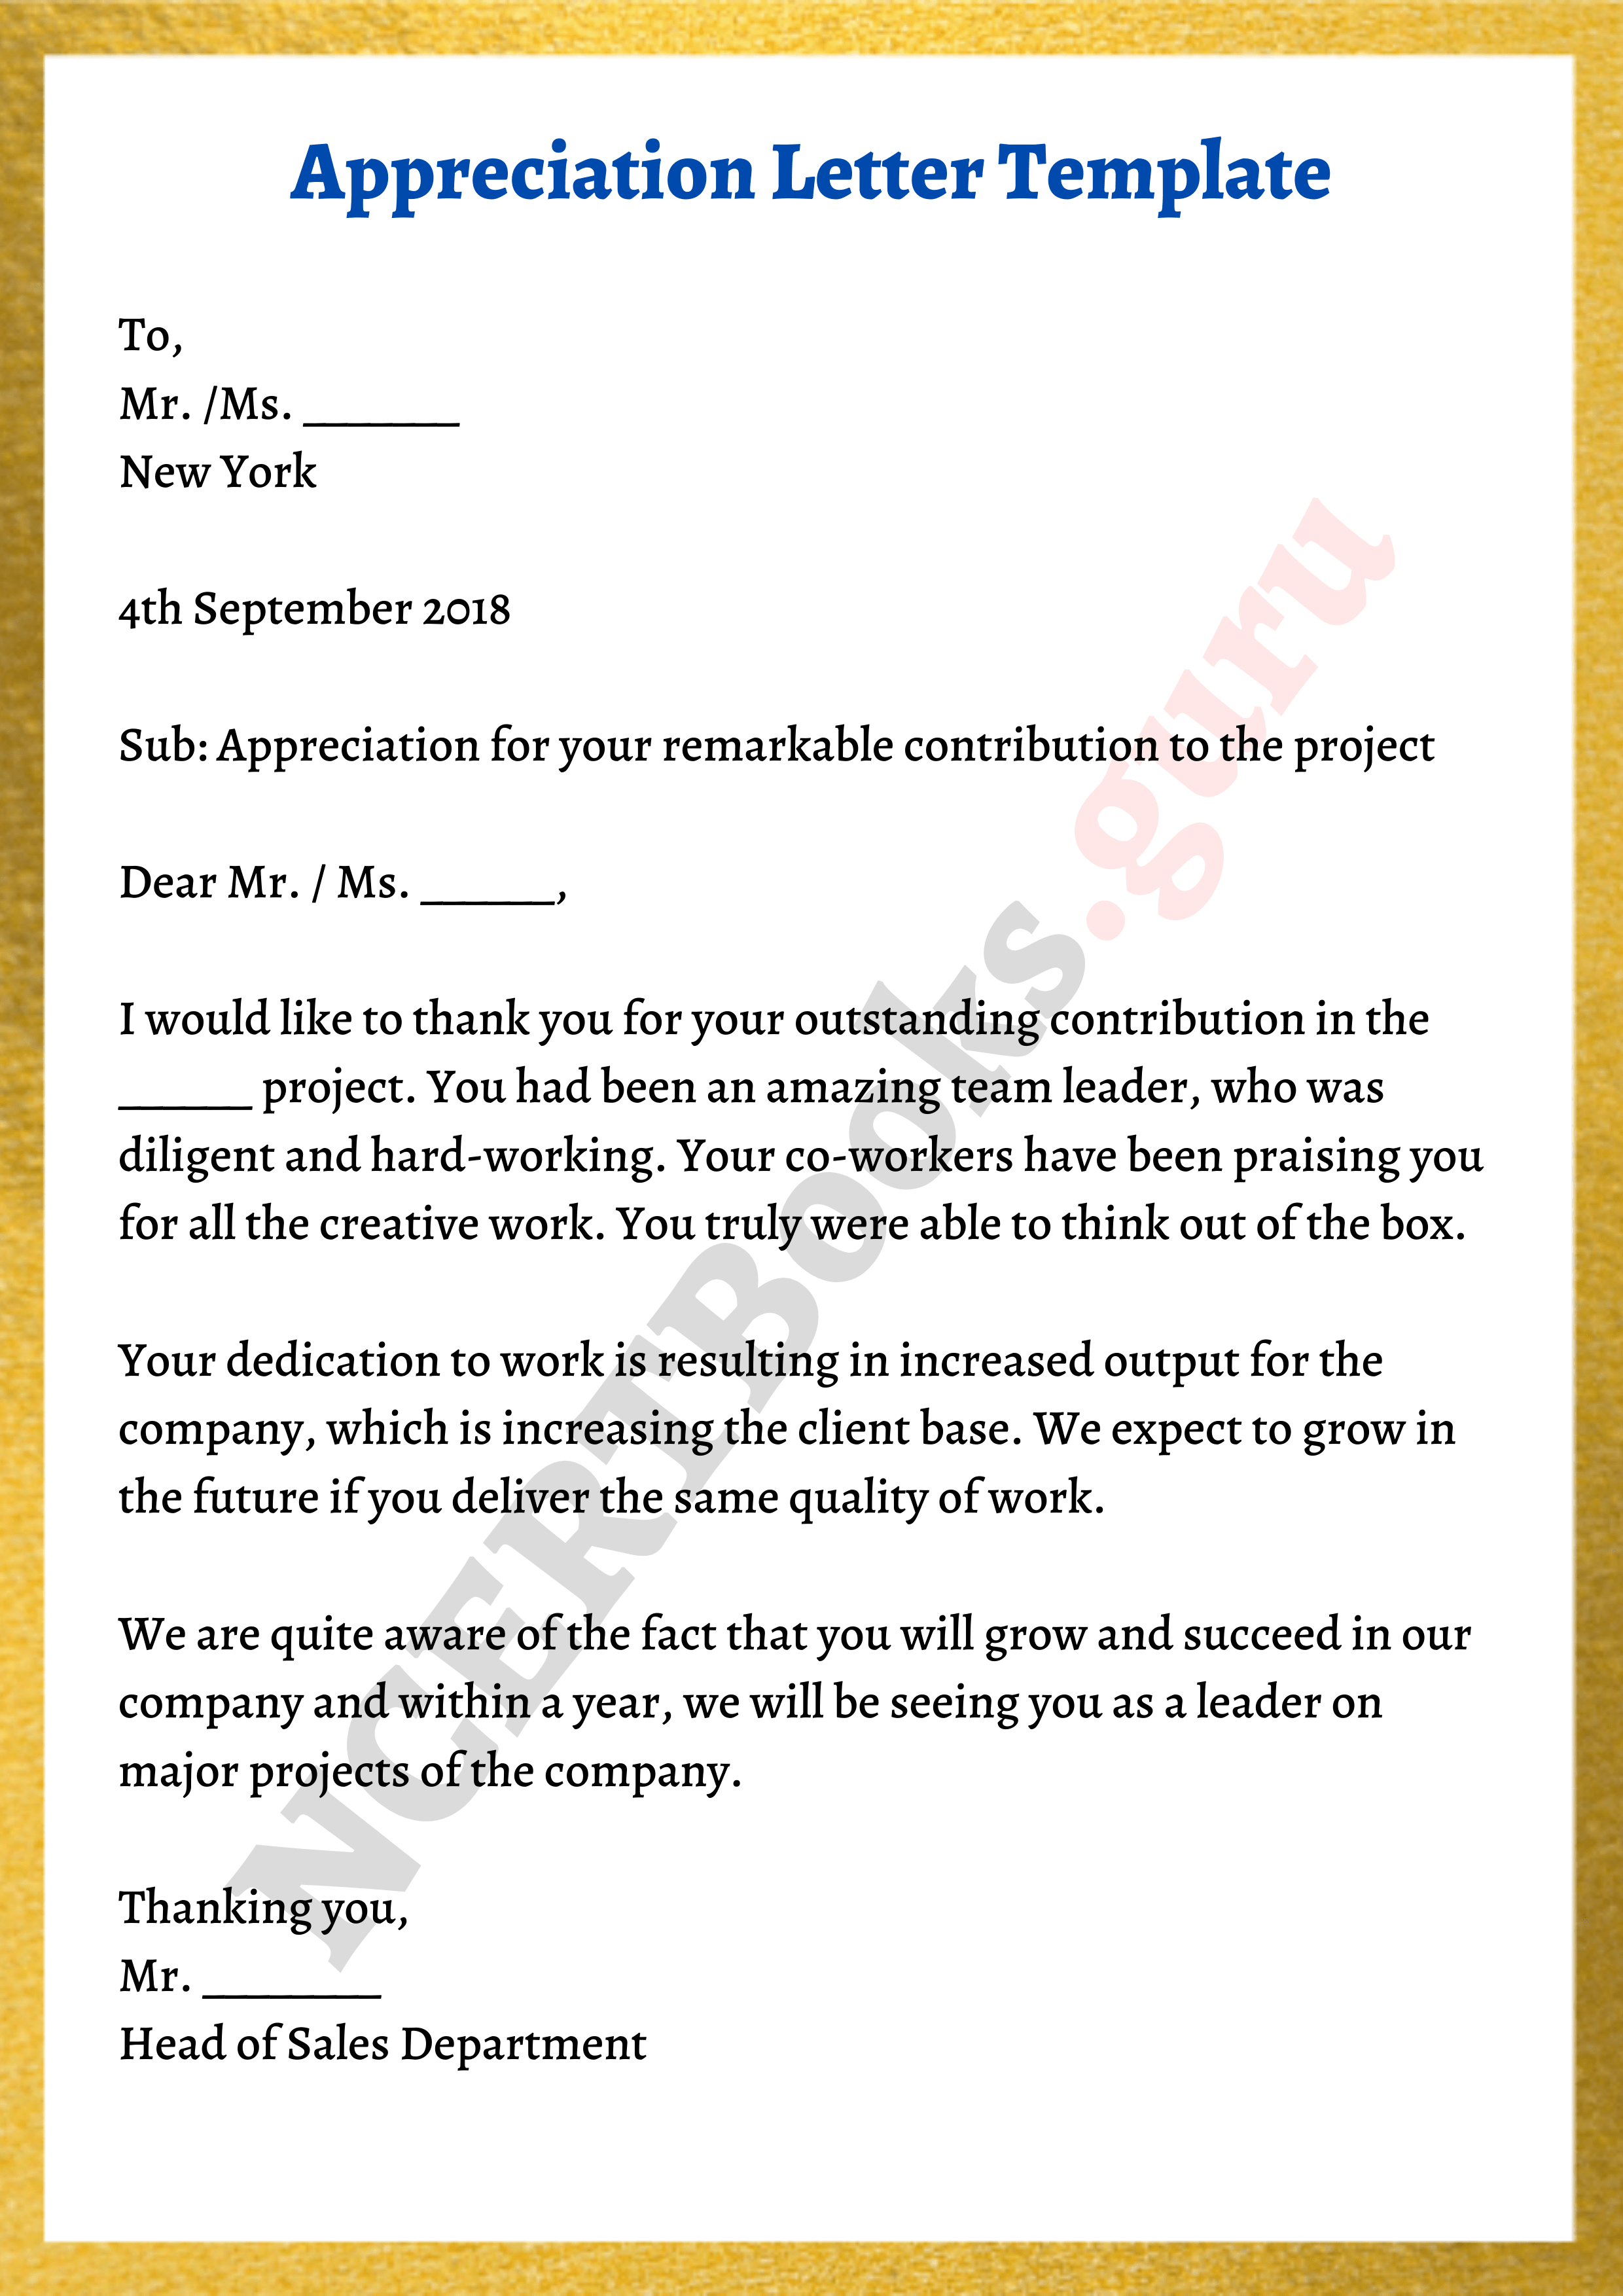 formatting-a-letter